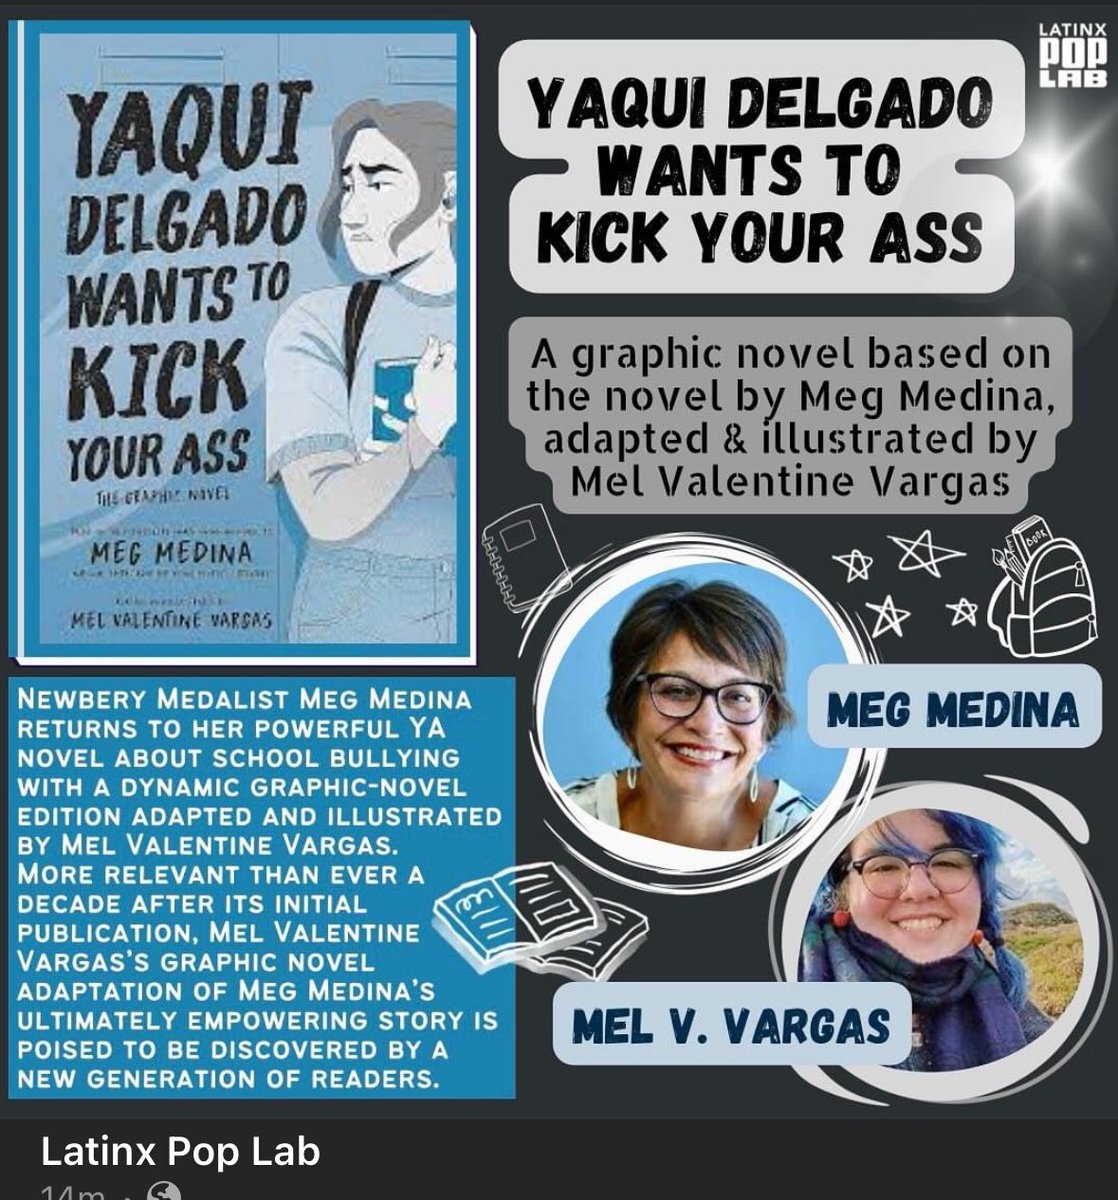 This week’s book is “Yaqui Delgado Wants to Kick Your Ass“, a graphic novel based on the captivating novel by Meg Medina, adapted and illustrated by Mel Valentine Vargas! 📚#latinxlit #latinxliterature #latinxpoplab  #latinxpoplabut #graphicnovel #yaquidelgadowantstokickyourass